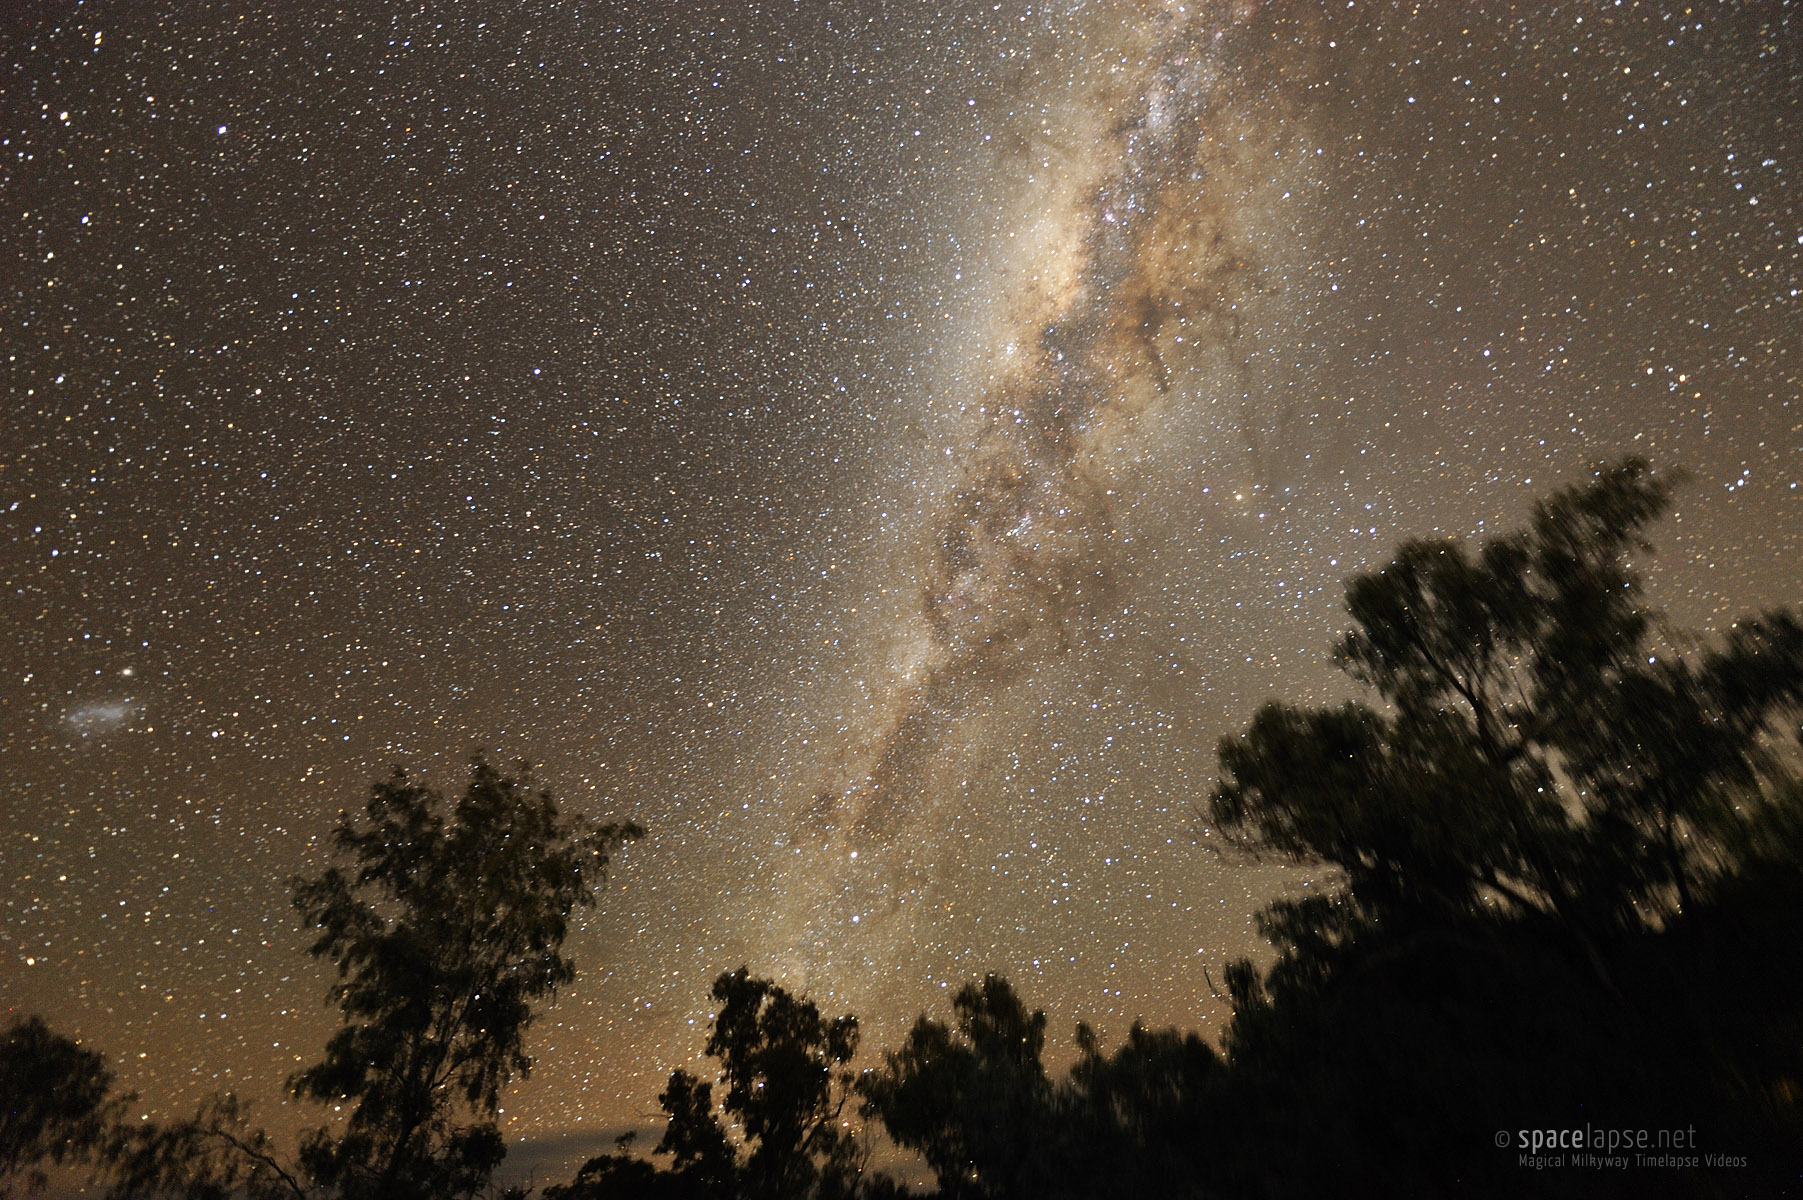 Moving Milky Way - This pictures has been shot with a tracking system to capture the movement of the milky way.